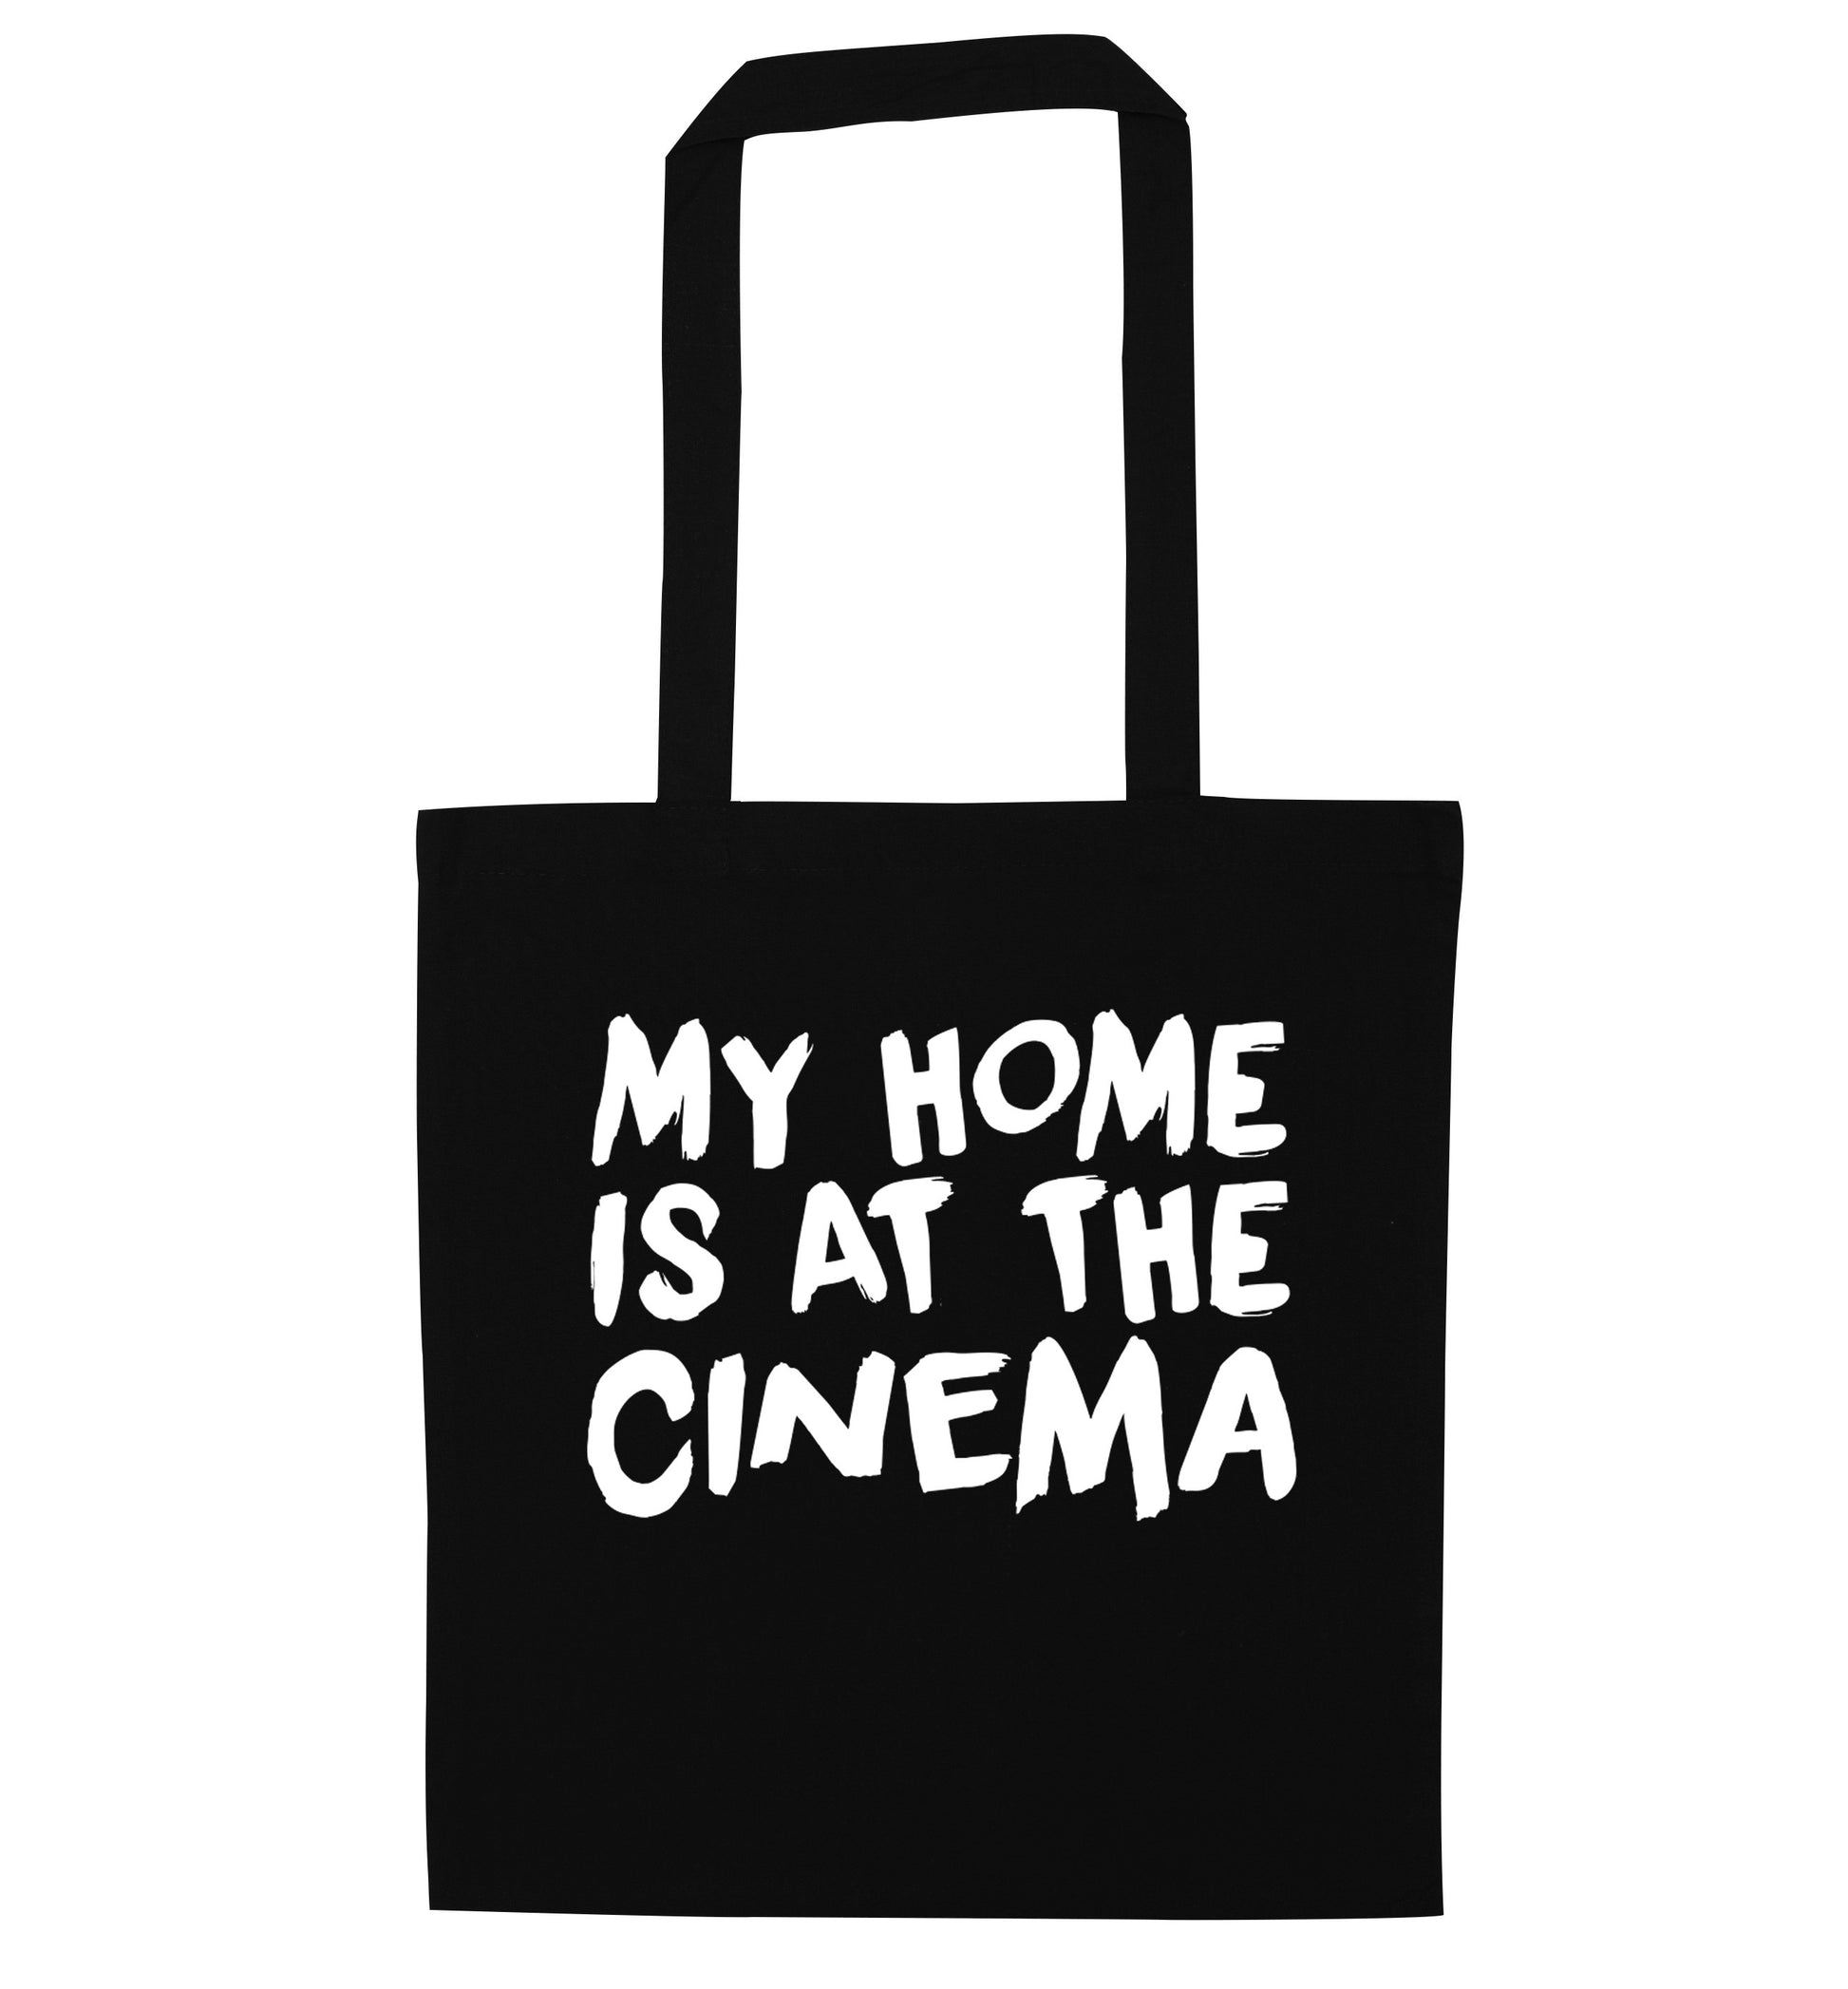 My home is at the cinema black tote bag